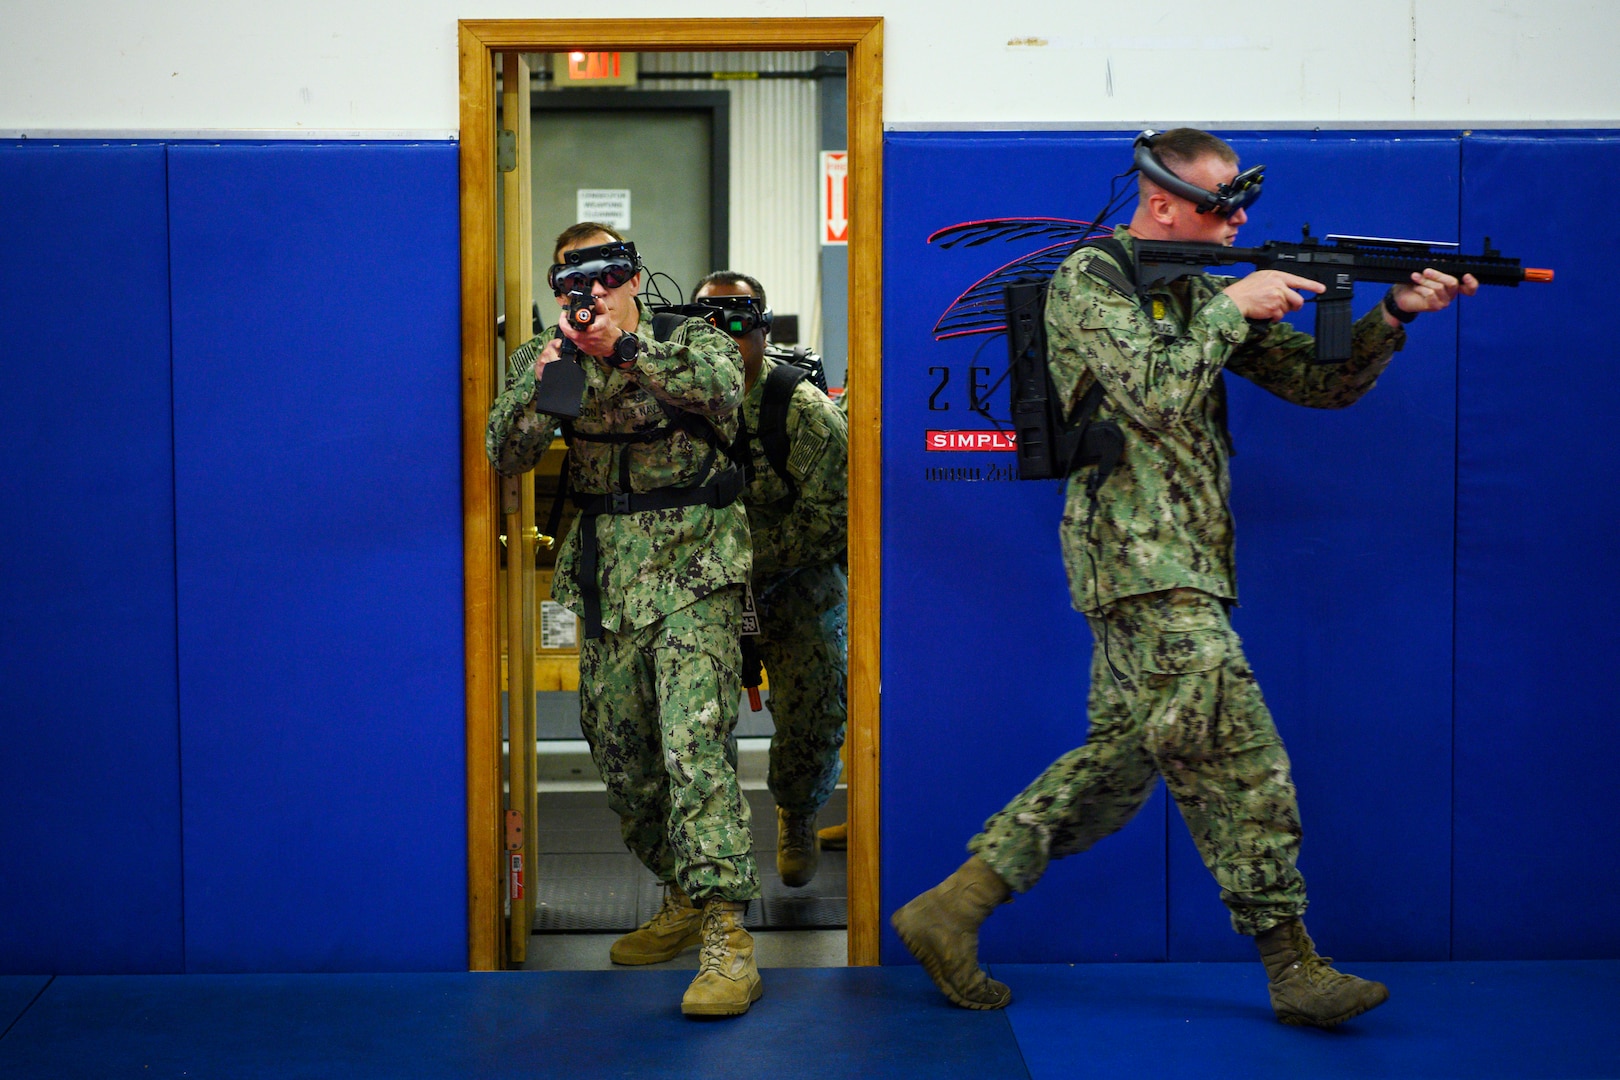 IMAGE: 190613-N-PO203-0147 CHESAPEAKE, Virginia (Jun. 13, 2019) Sailors assigned to the Center for Security Forces detachment in Chesapeake, Va., demonstrate the Office of Naval Research Global (ONRG) TechSolutions-sponsored Tactically Reconfigurable Artificial Combat Enhanced Reality (TRACER) system. TechSolutions partnered with Naval Surface Warfare Center Dahlgren Division to develop the TRACER package, which consists of a virtual-reality headset, a backpack, a state-of-the-art simulated weapon designed to deliver realistic recoil, and a software package that creates multiple and adaptable simulation scenarios for security personnel to experience. ONRG TechSolutions allows Sailors and Marines to submit technology requests directly to the development community for rapid response prototyping. (U.S. Navy photo by John F. Williams)